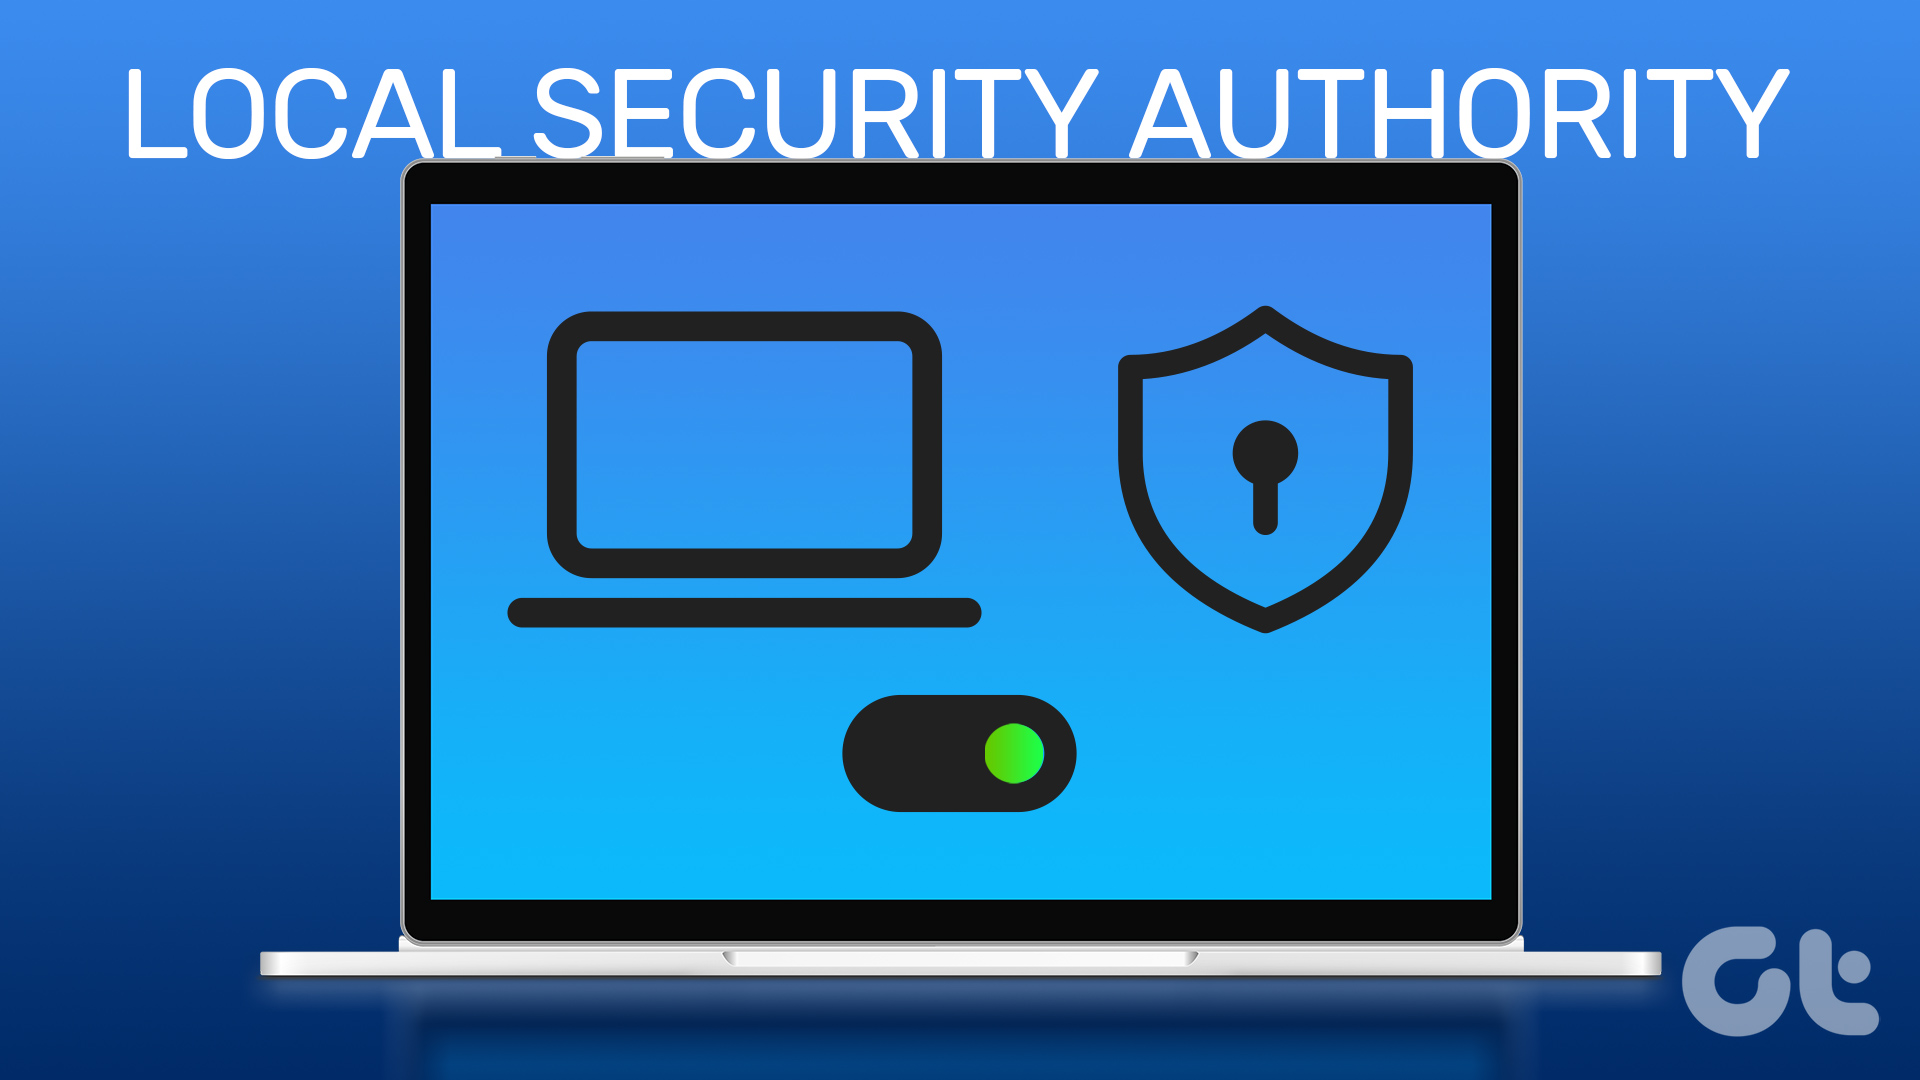 Enable Windows Local Security Authority (LSA) Process